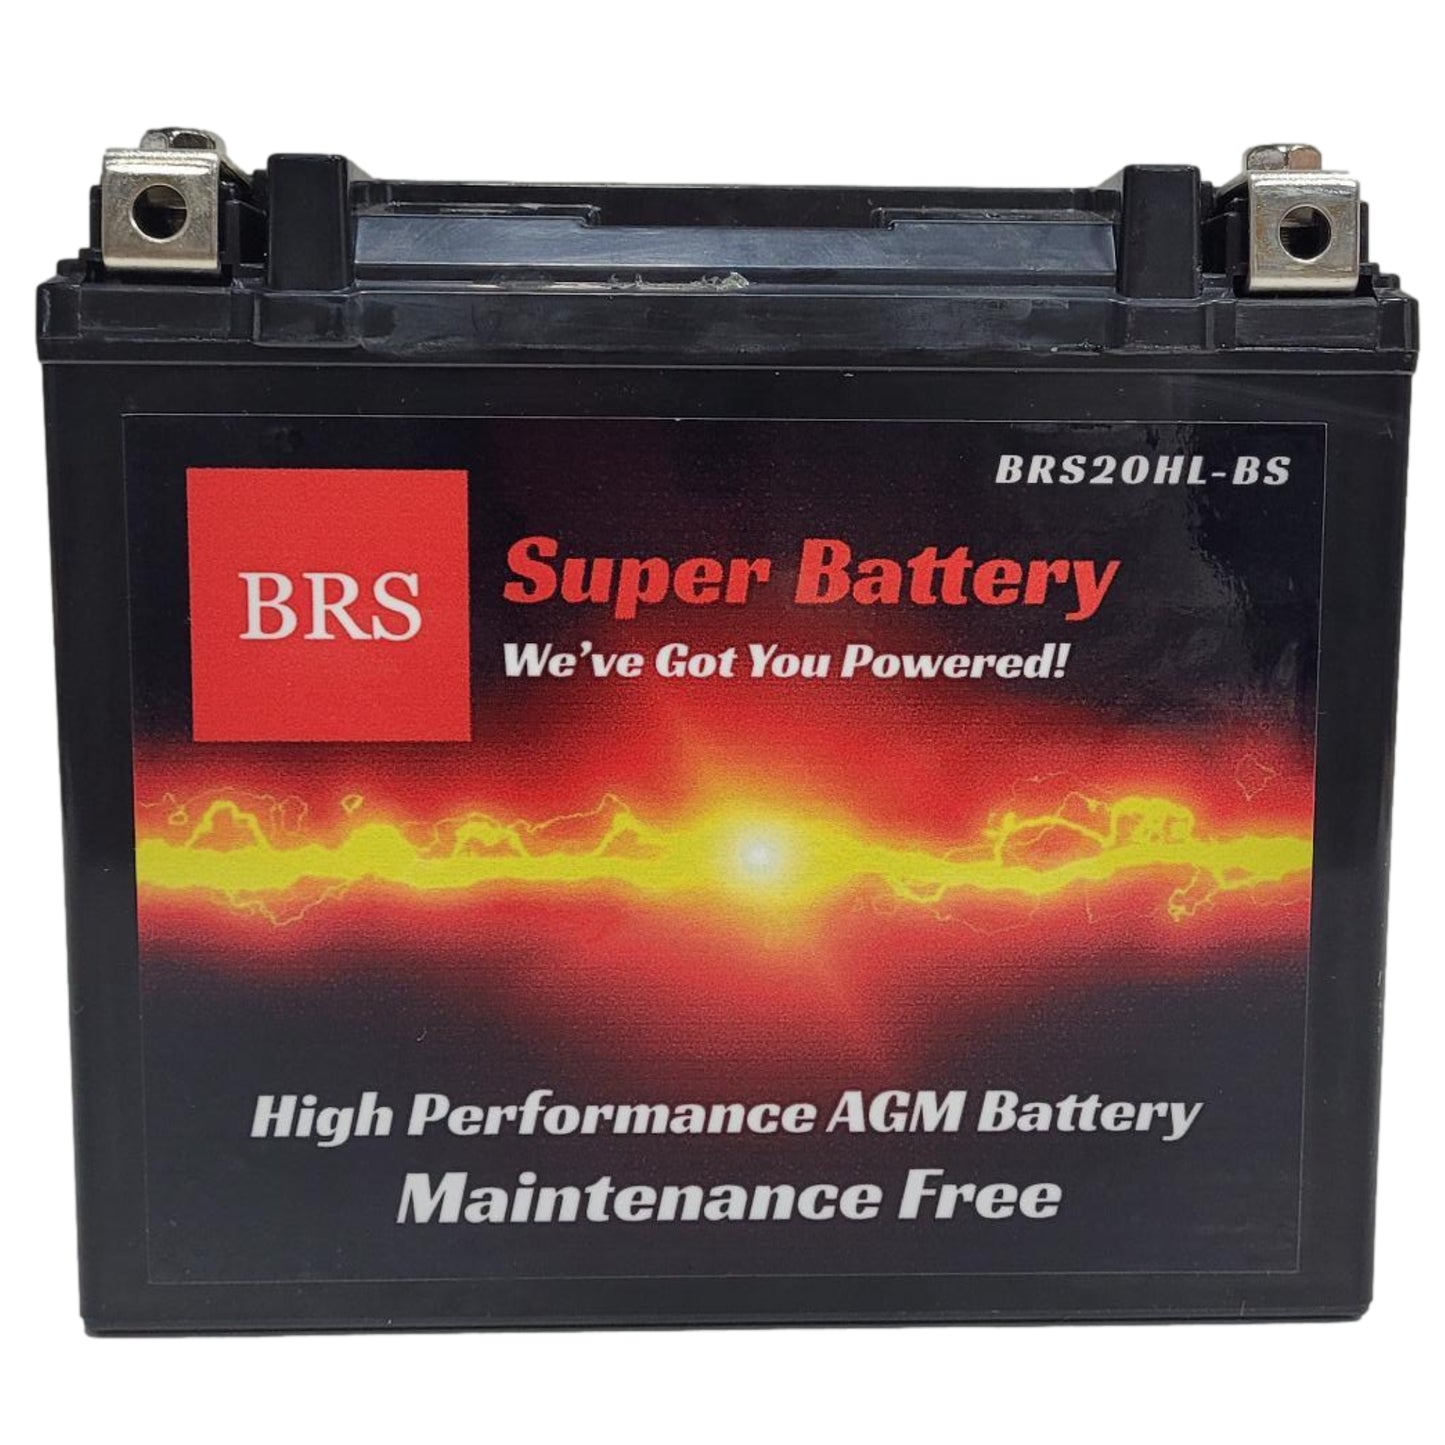 WPX20HL-BS 12v High Performance Sealed AGM PowerSport 2 Year Battery - BRS Super Battery